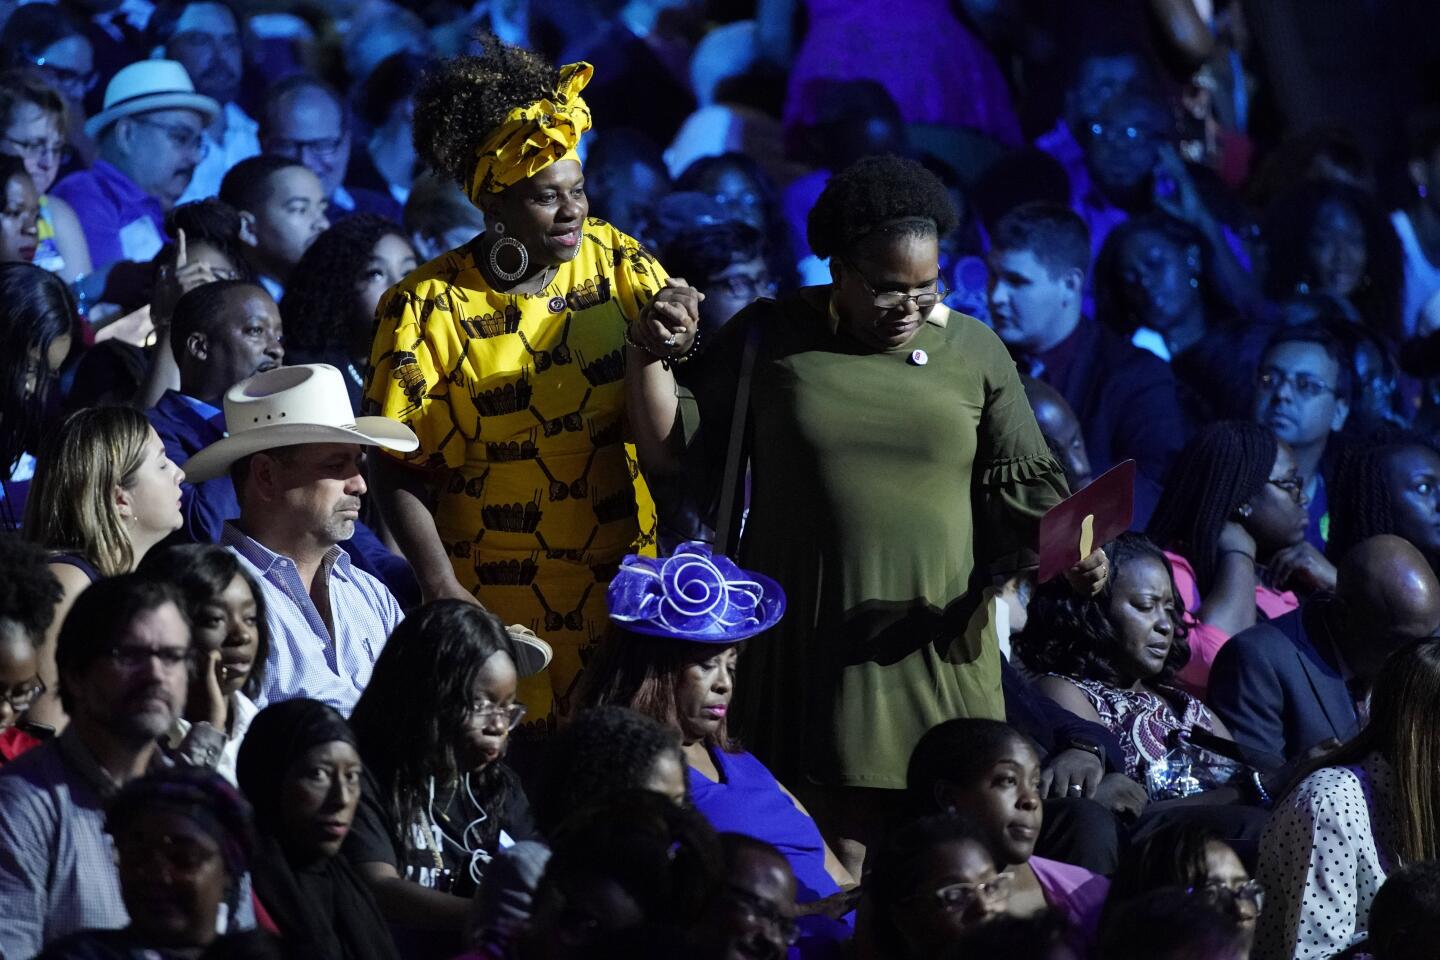 Audience members take their seats before the Democratic presidential primary debate Thursday, Sept. 12, 2019, at Texas Southern University in Houston.